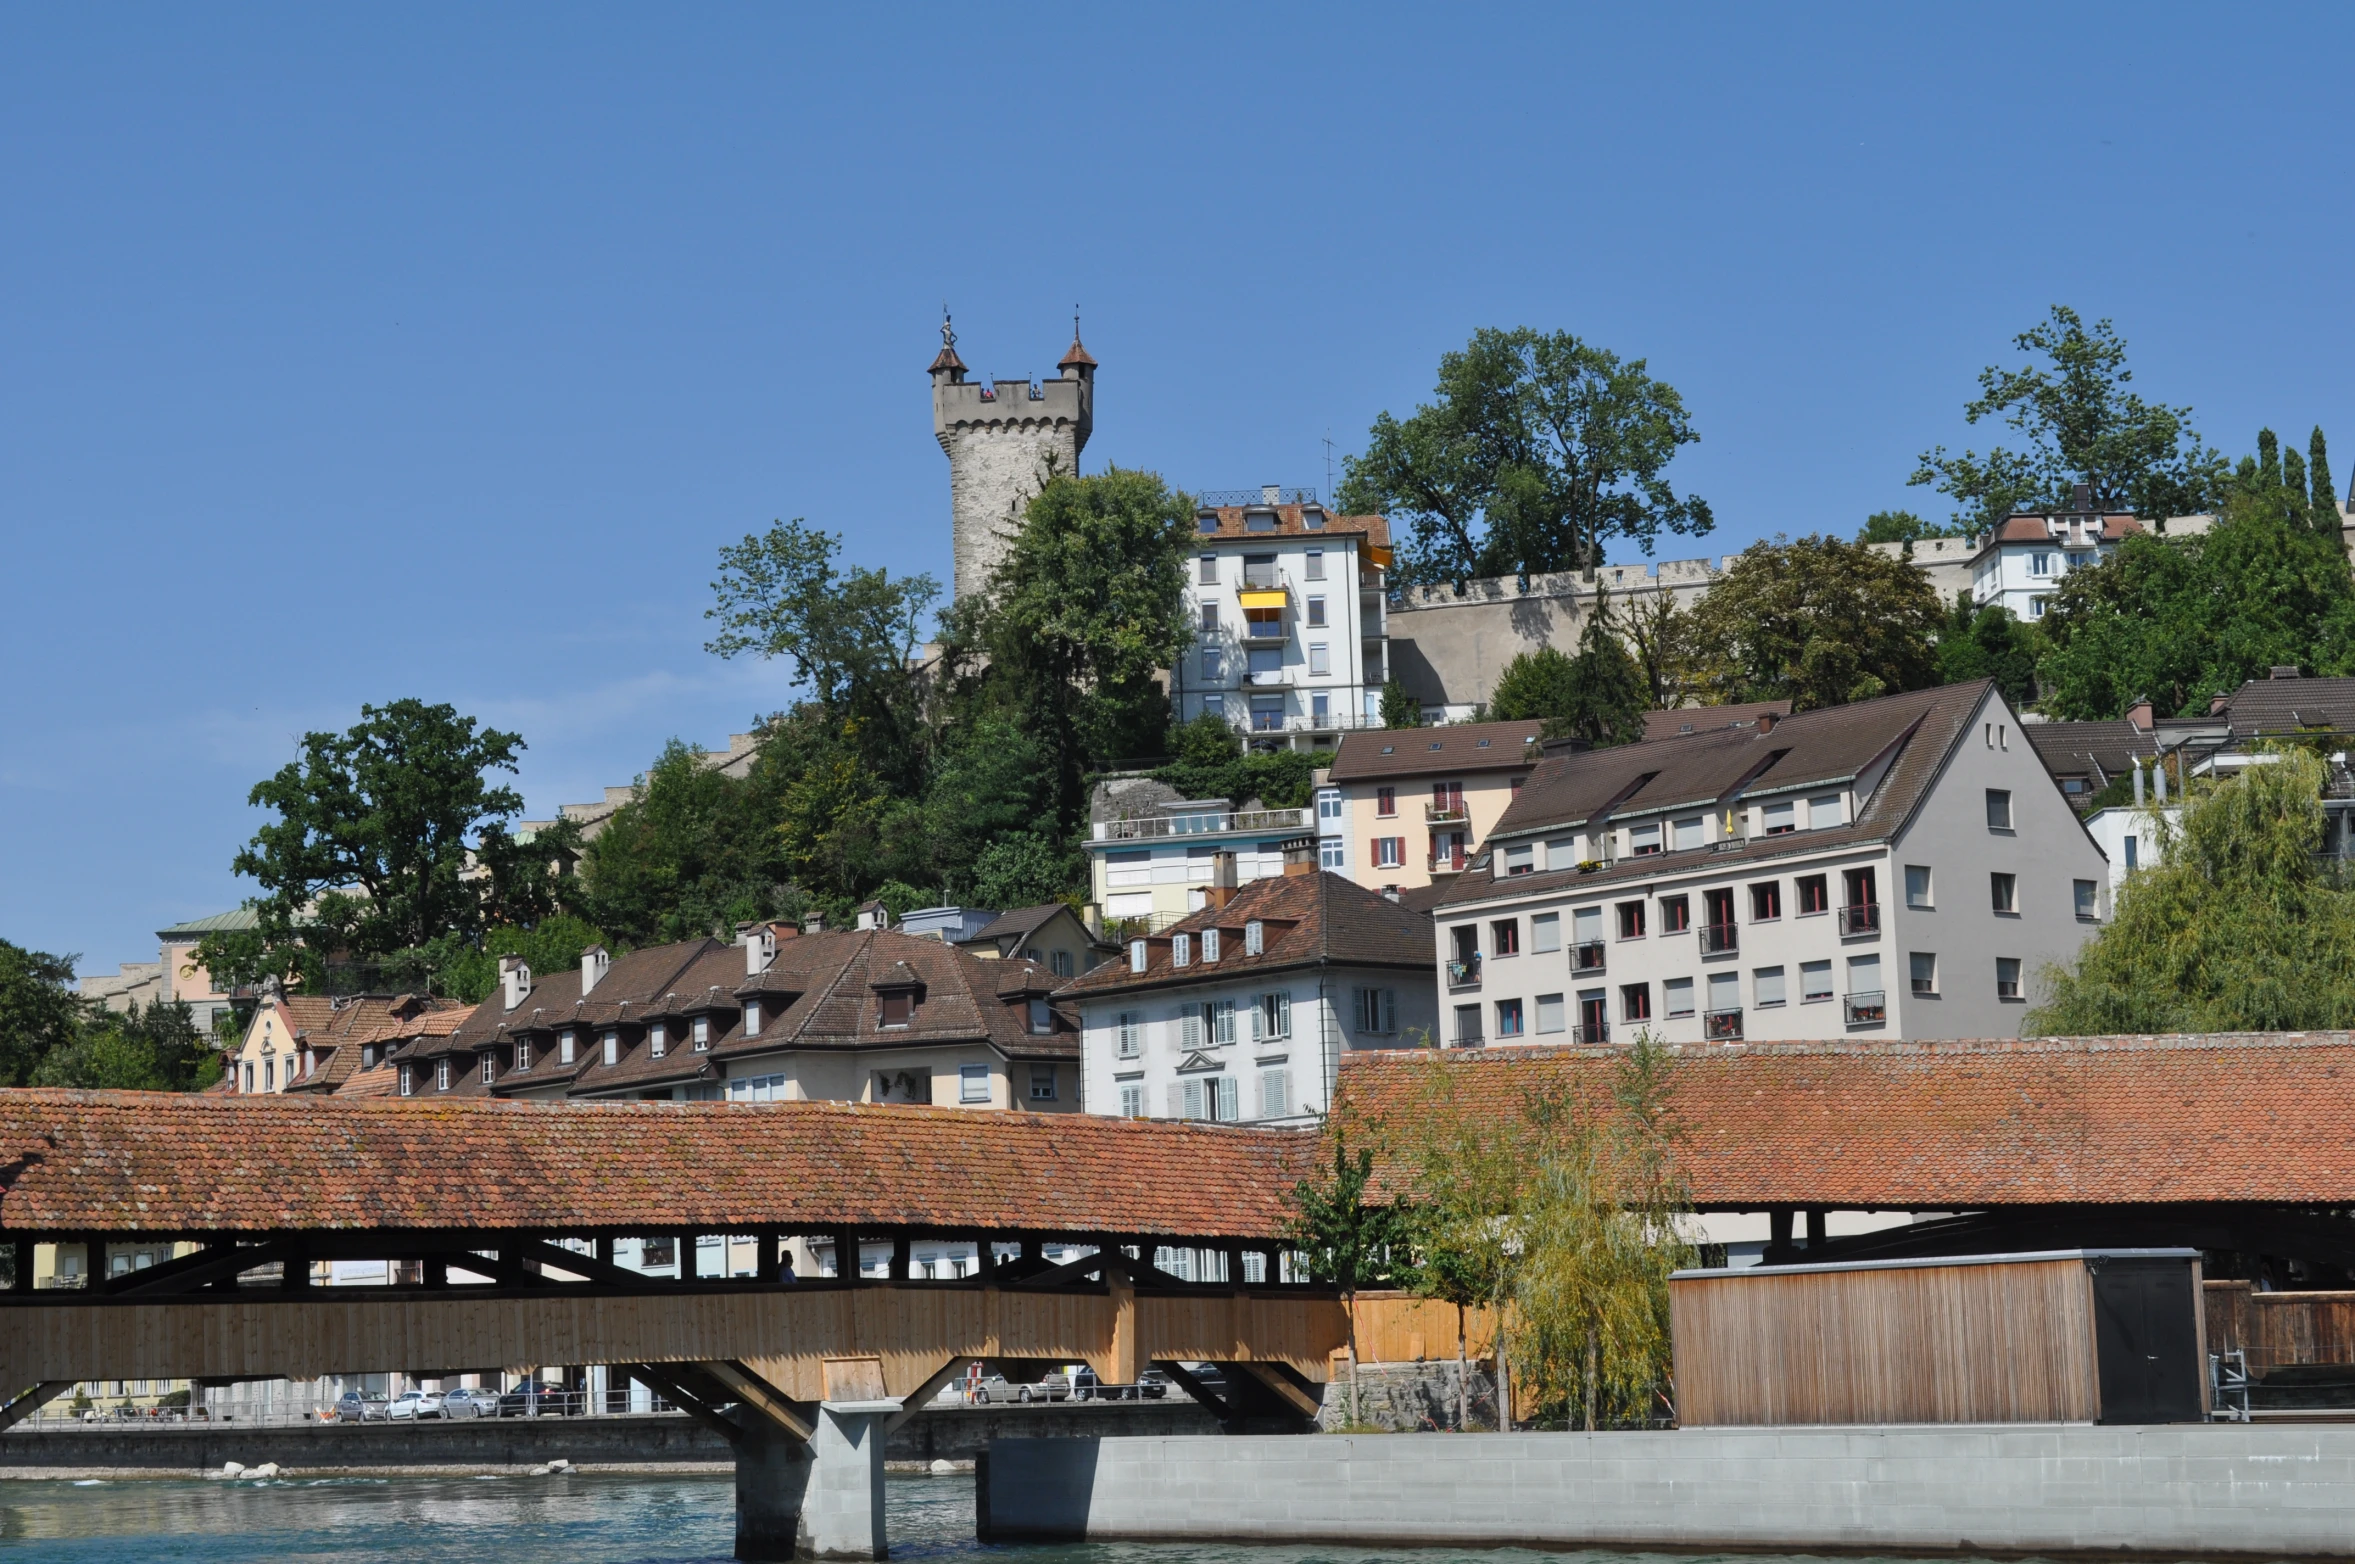 an old bridge crosses the river in front of some older buildings